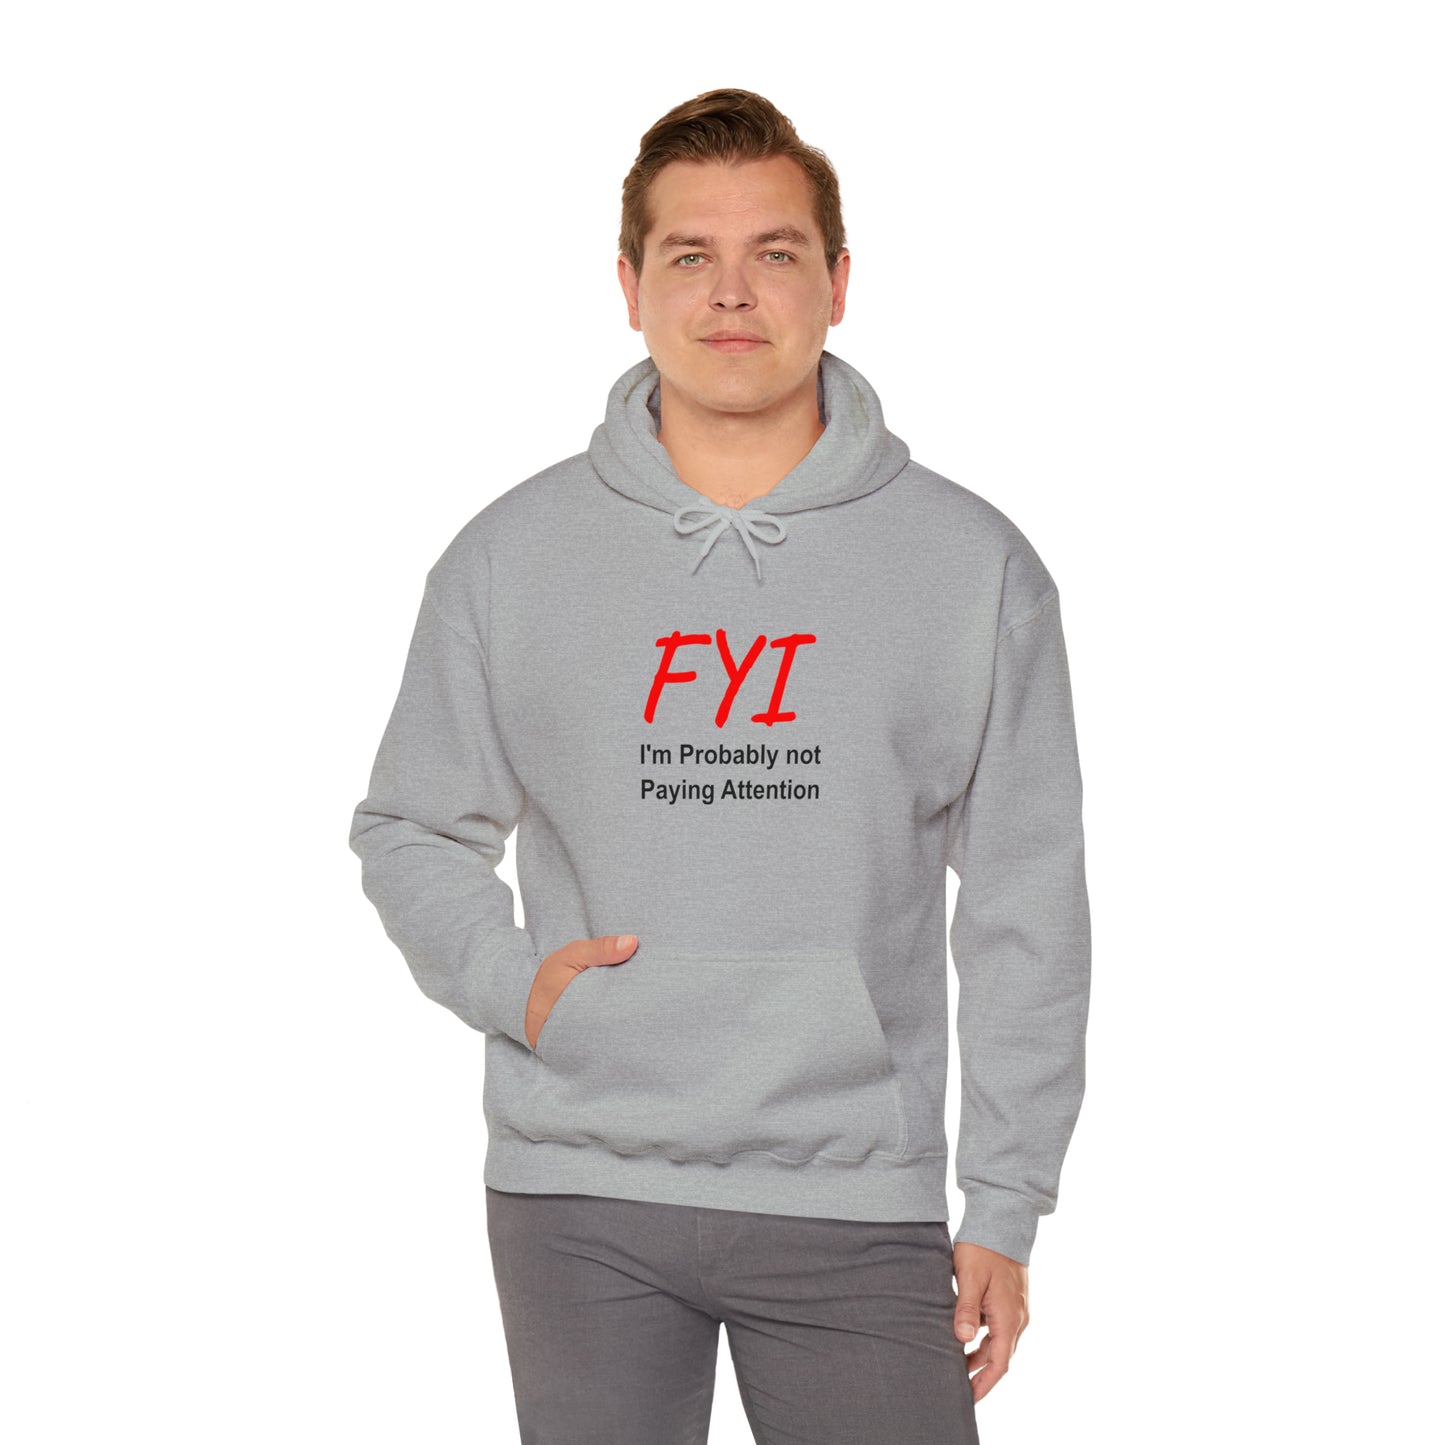 FYI not paying attention - Hooded Sweatshirt